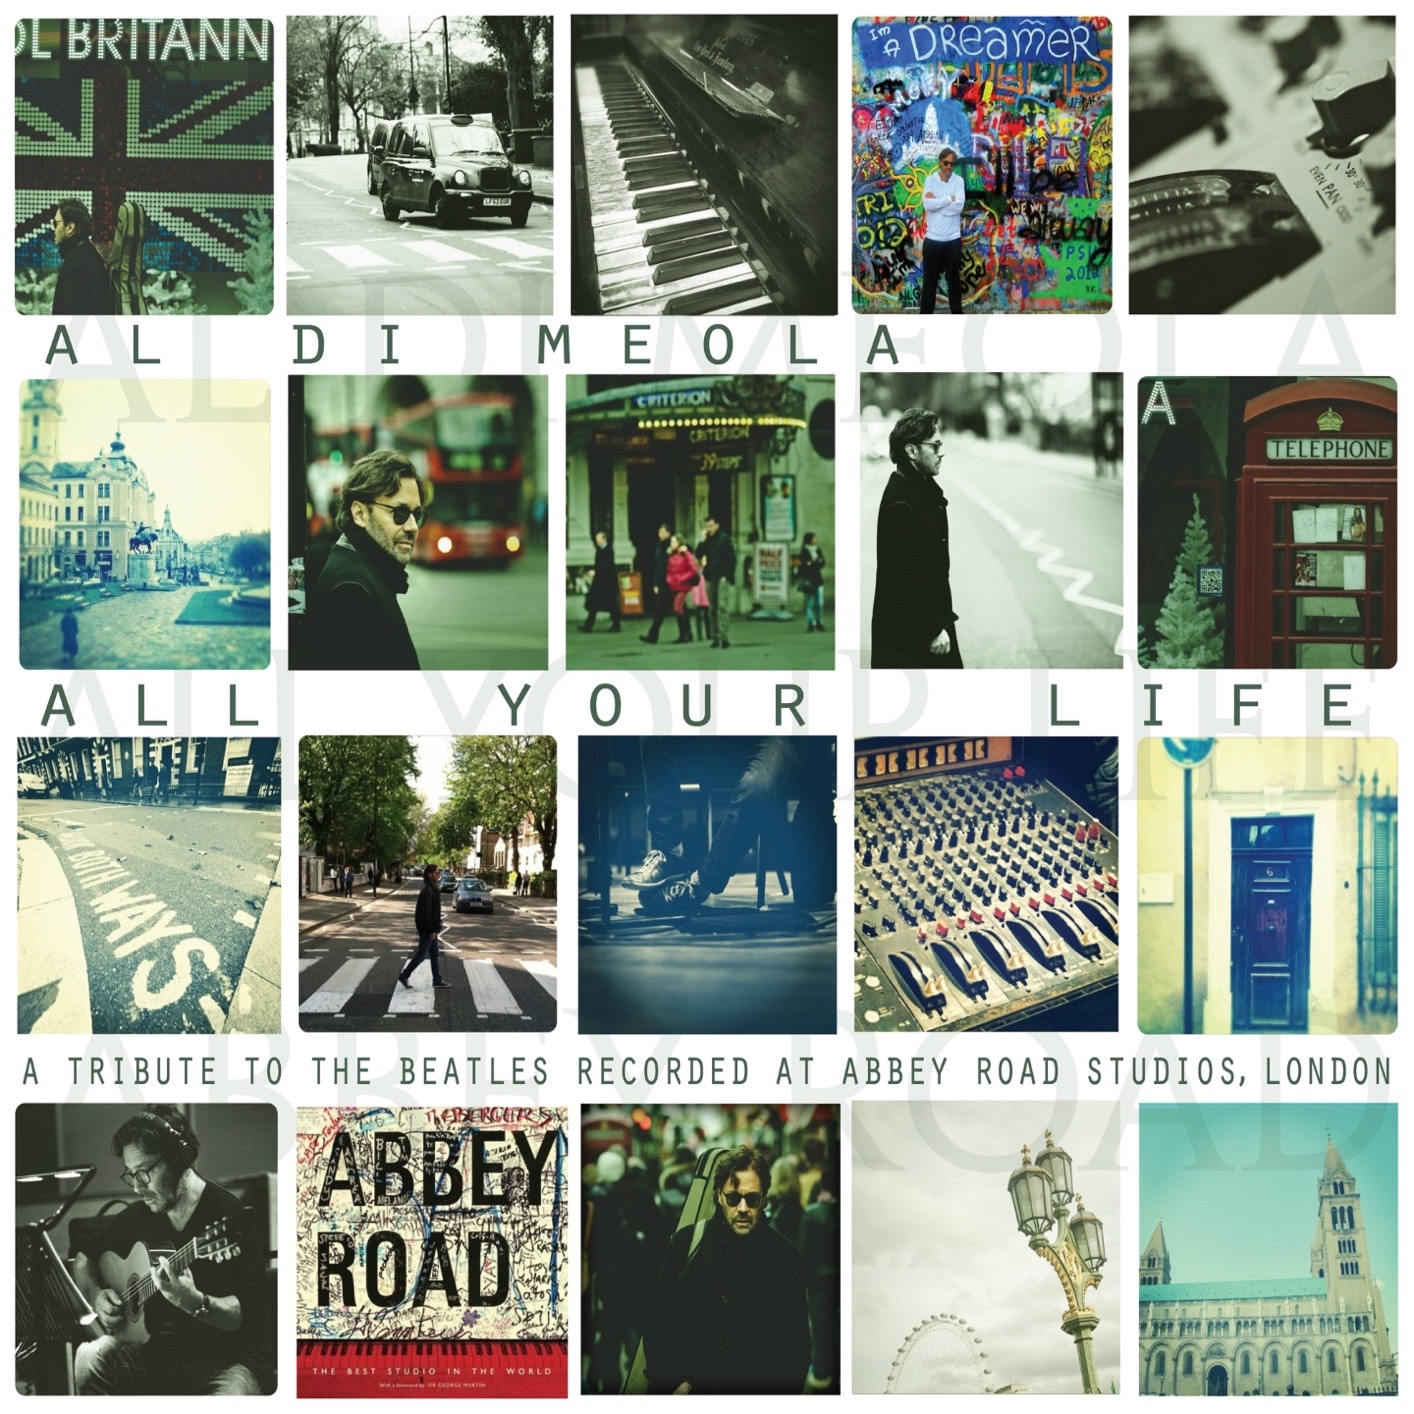 Al Di Meola - All Your Life "A Tribute To The Beatles" (2013/2019) [FLAC 24bit/96kHz]